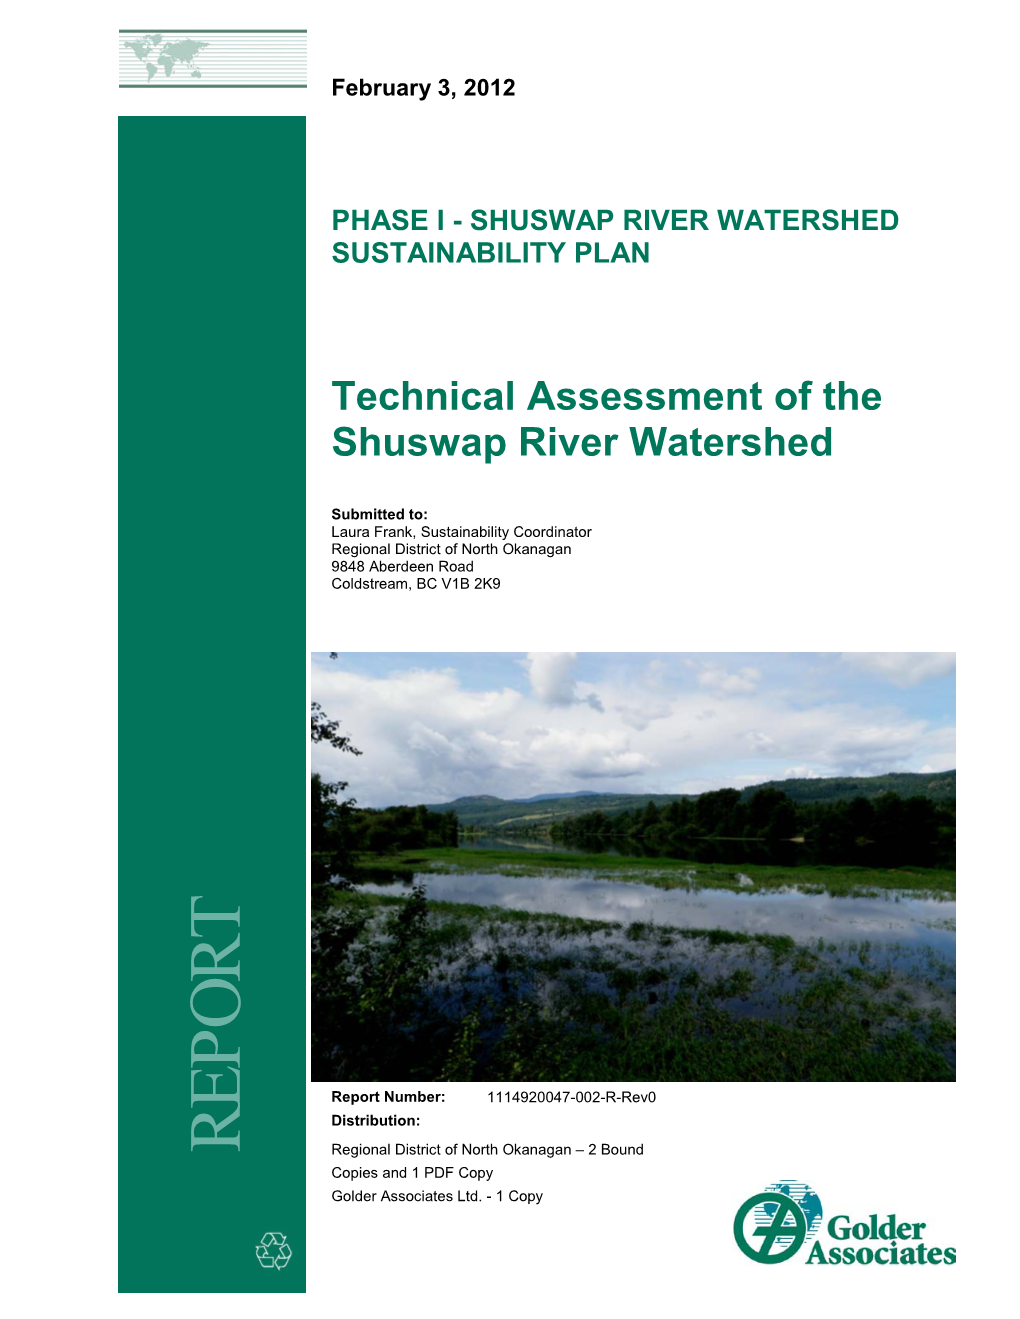 Technical Assessment of the Shuswap River Watershed